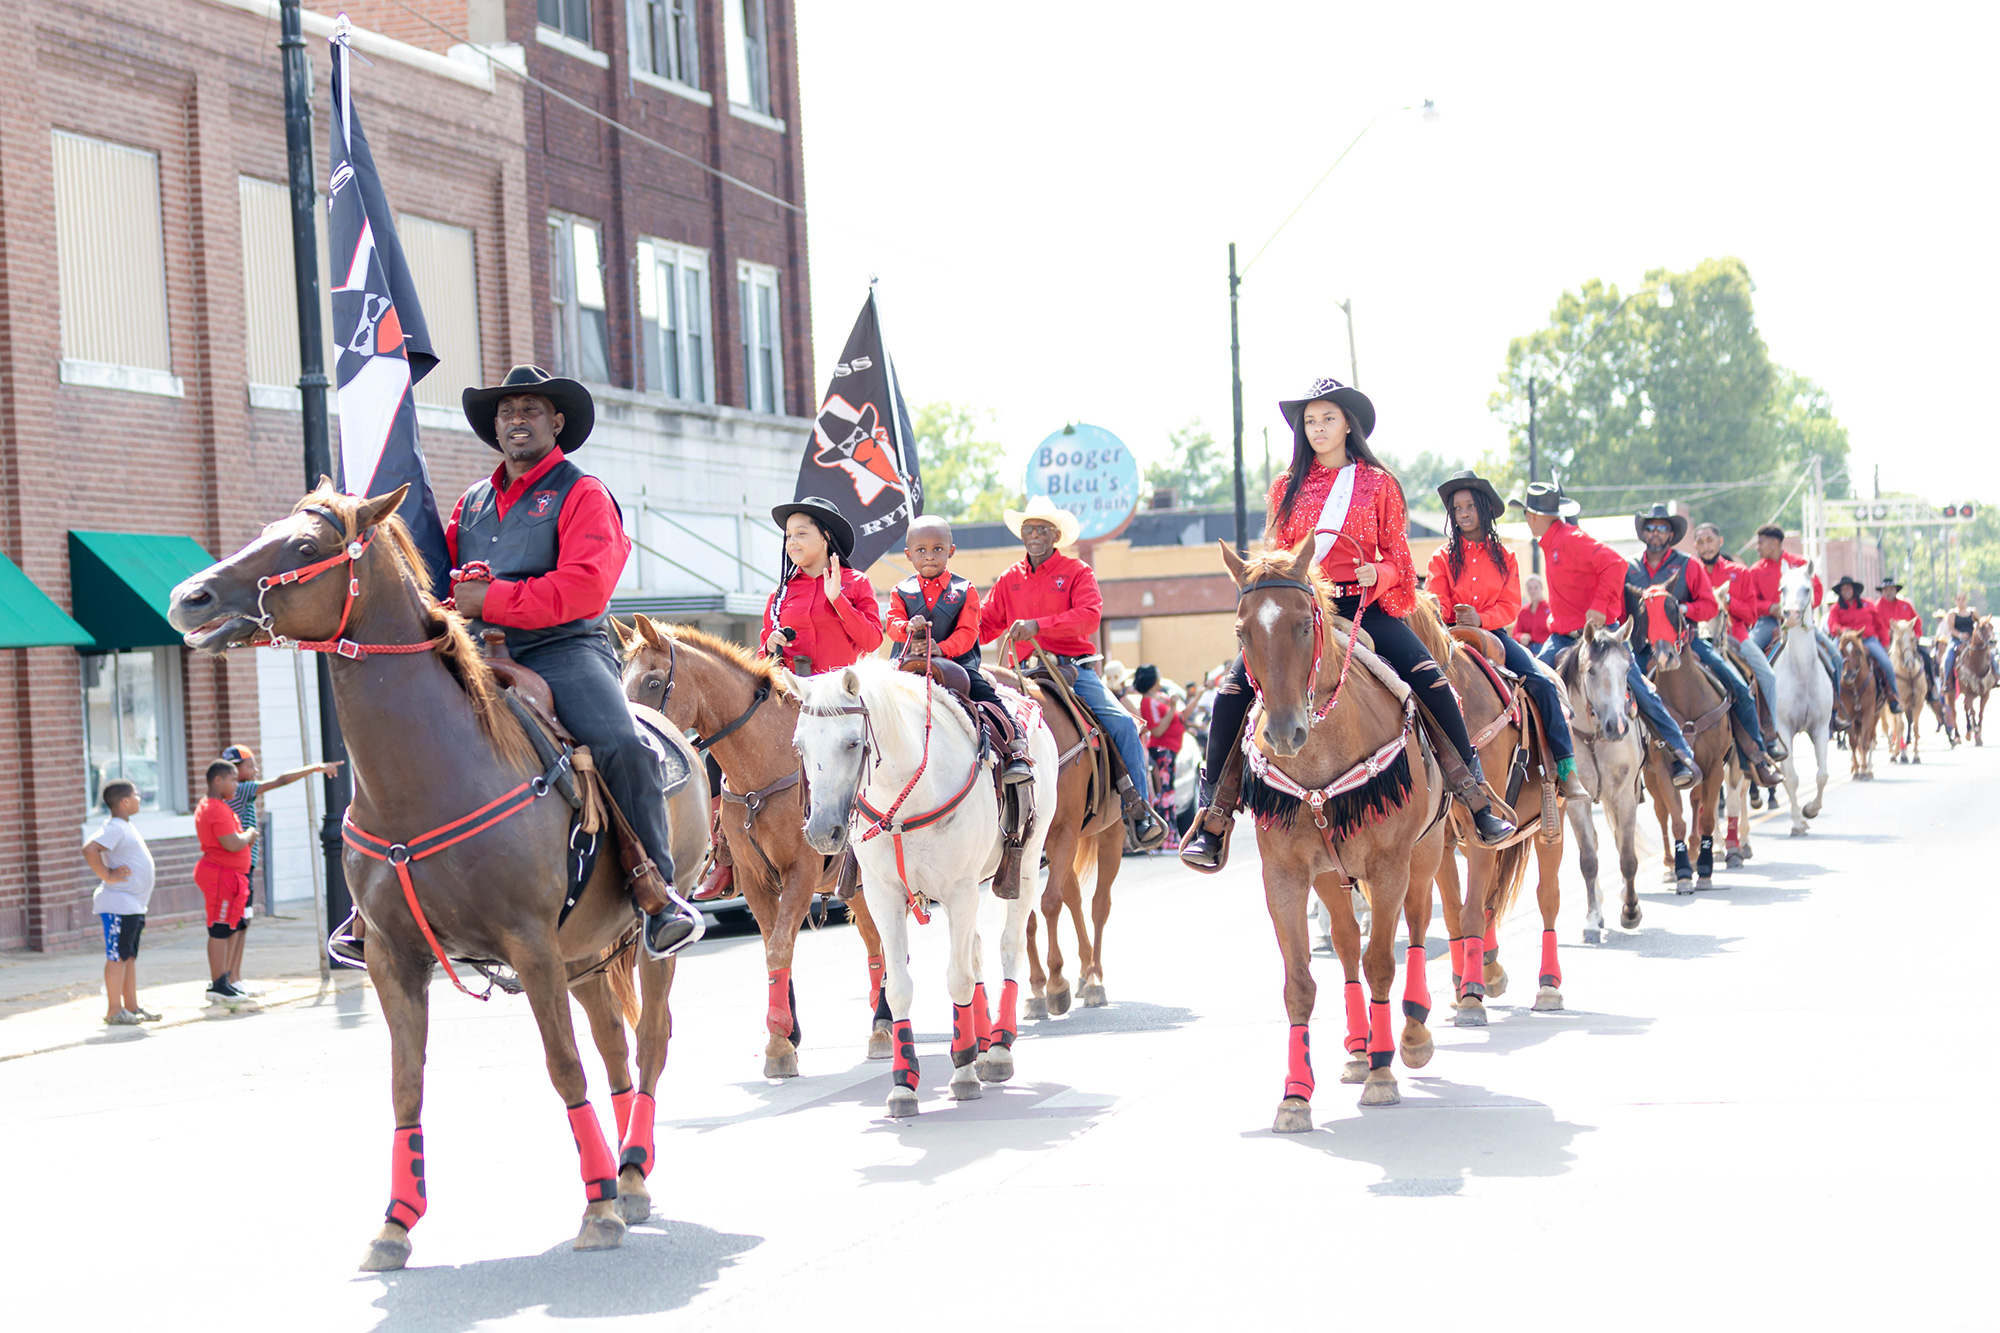 A group of black cowboys wearing black and red, riding horses